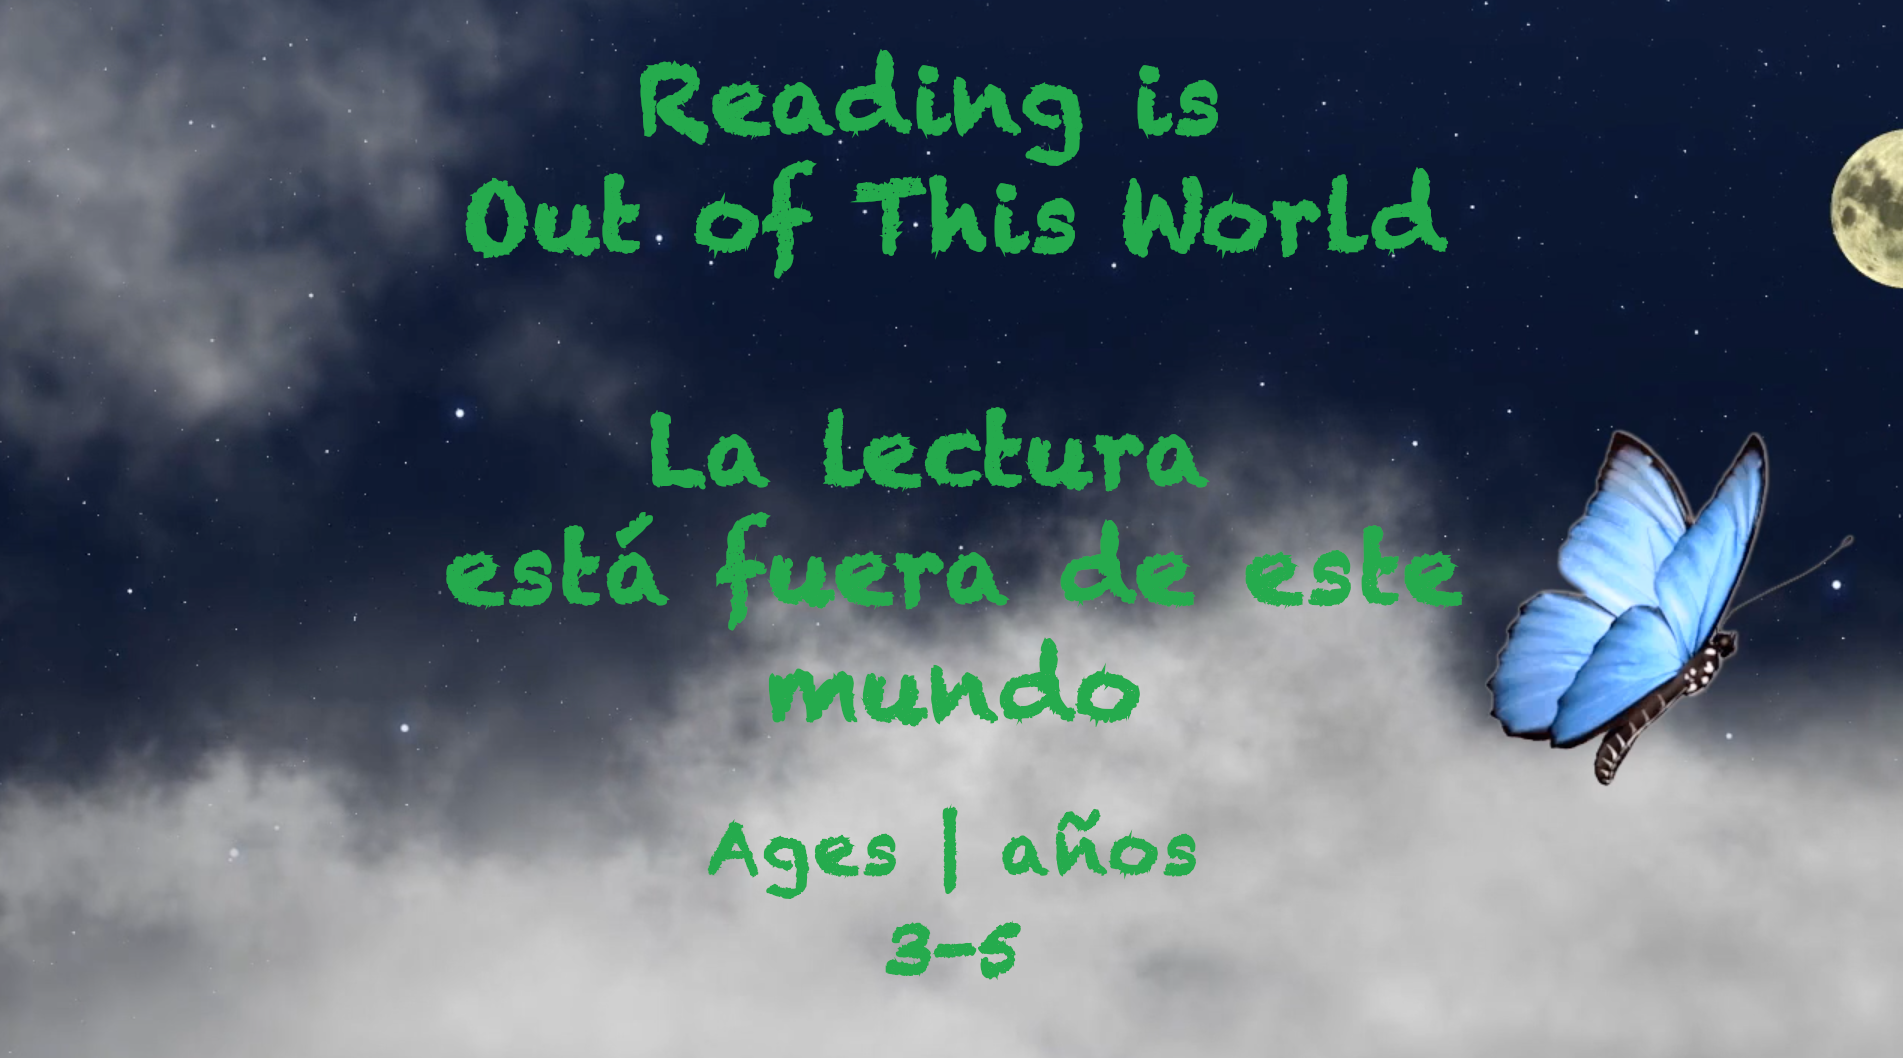 Reading is Out of This World for 3-5 year olds